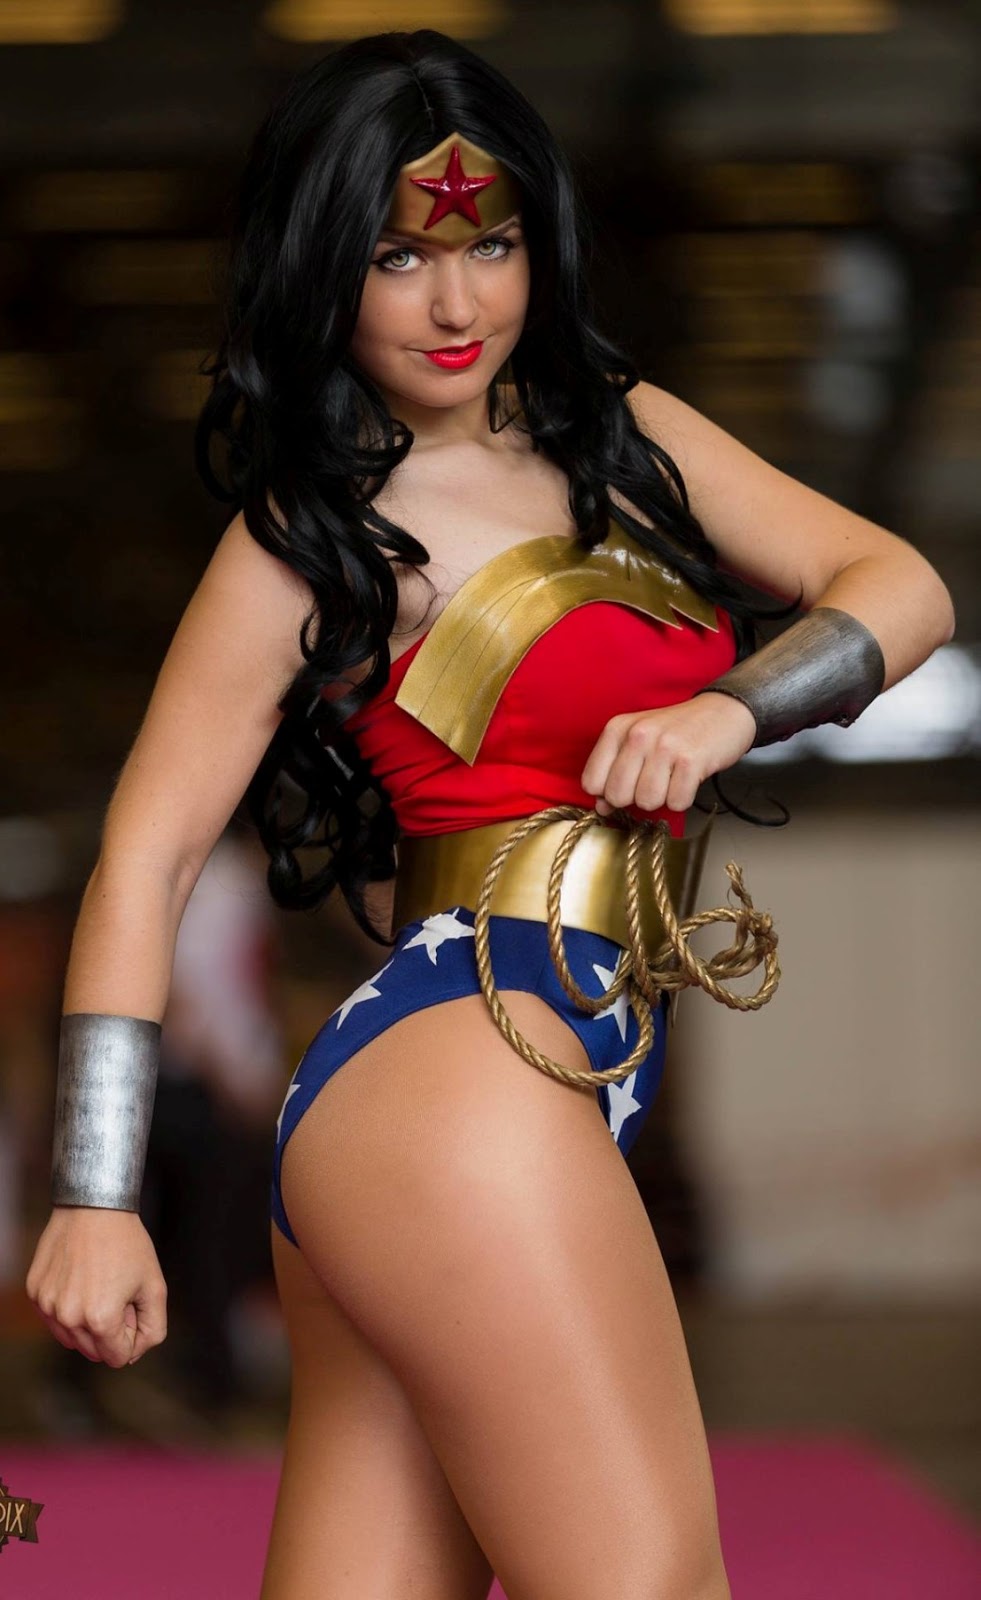 Asian girl wonder woman cosplay solo cum ❤️ Best adult photos at cums picture